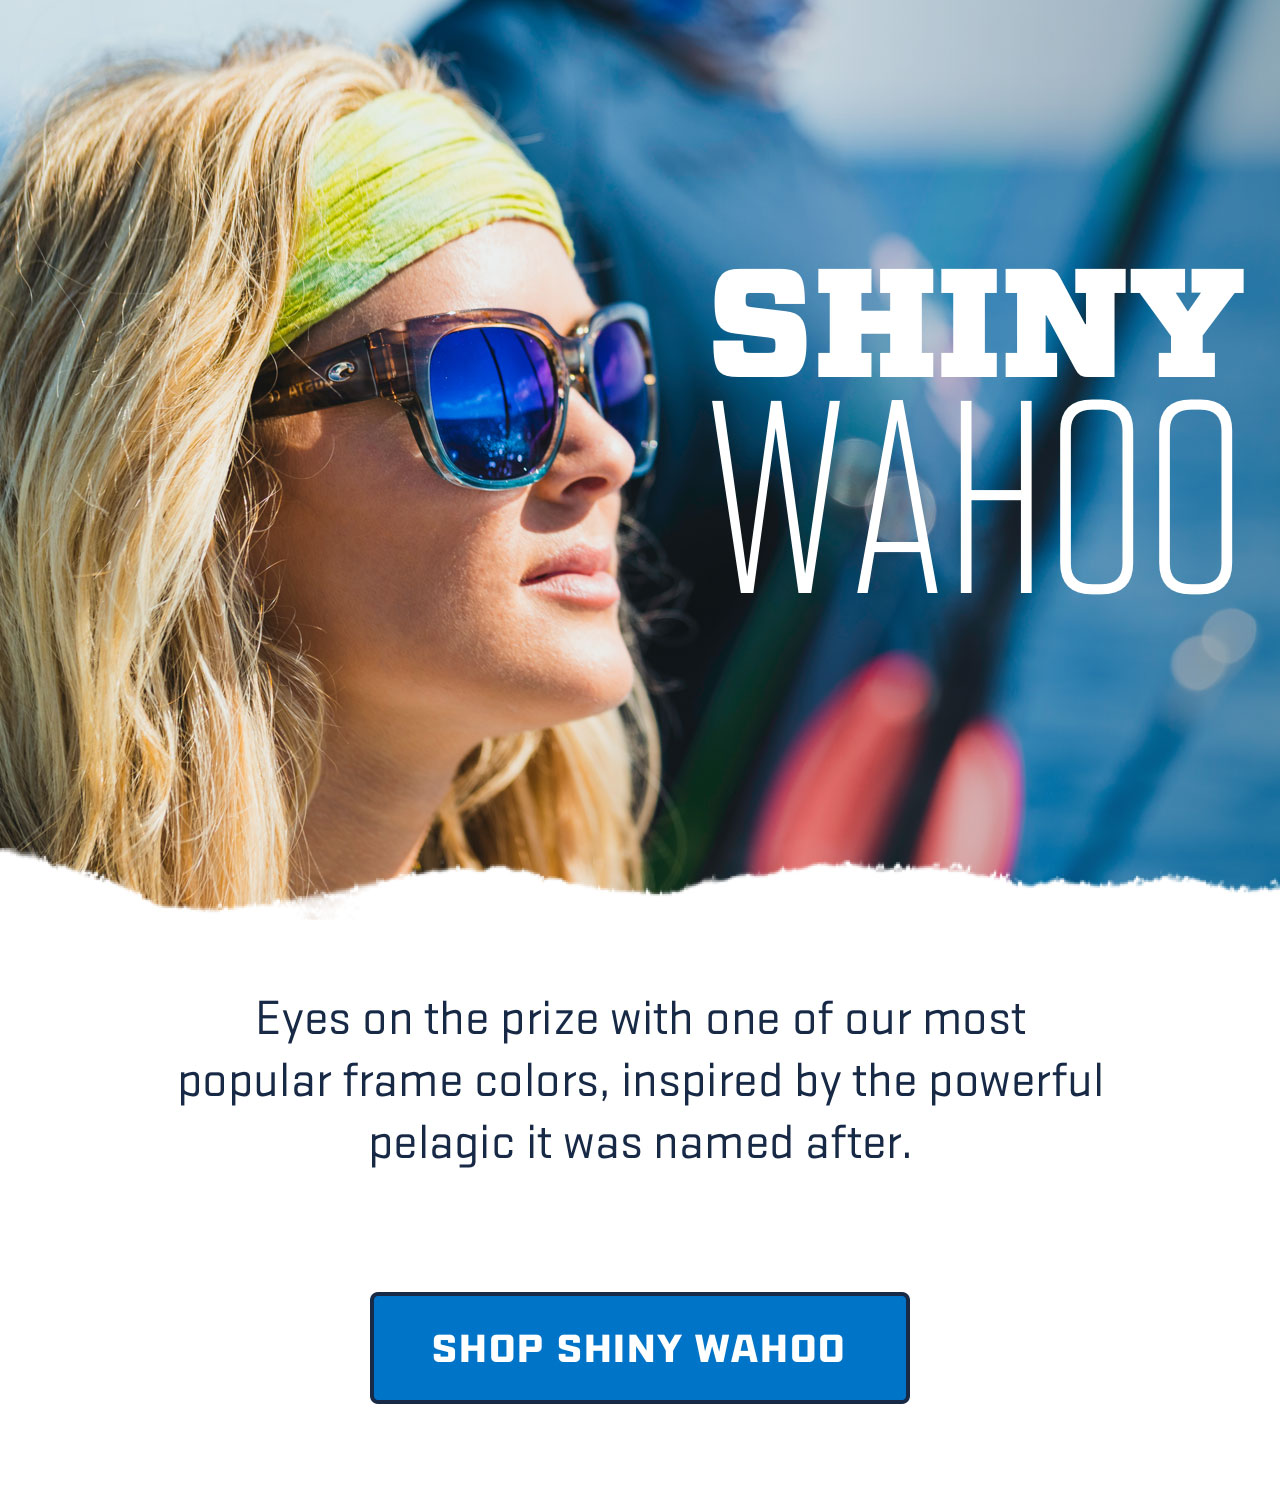 

SHINY
WAHOO

Eyes on the prize with one of our most
popular frame colors, inspired by the powerful
pelagic it was named after.

[ SHOP SHINY WAHOO ]


									